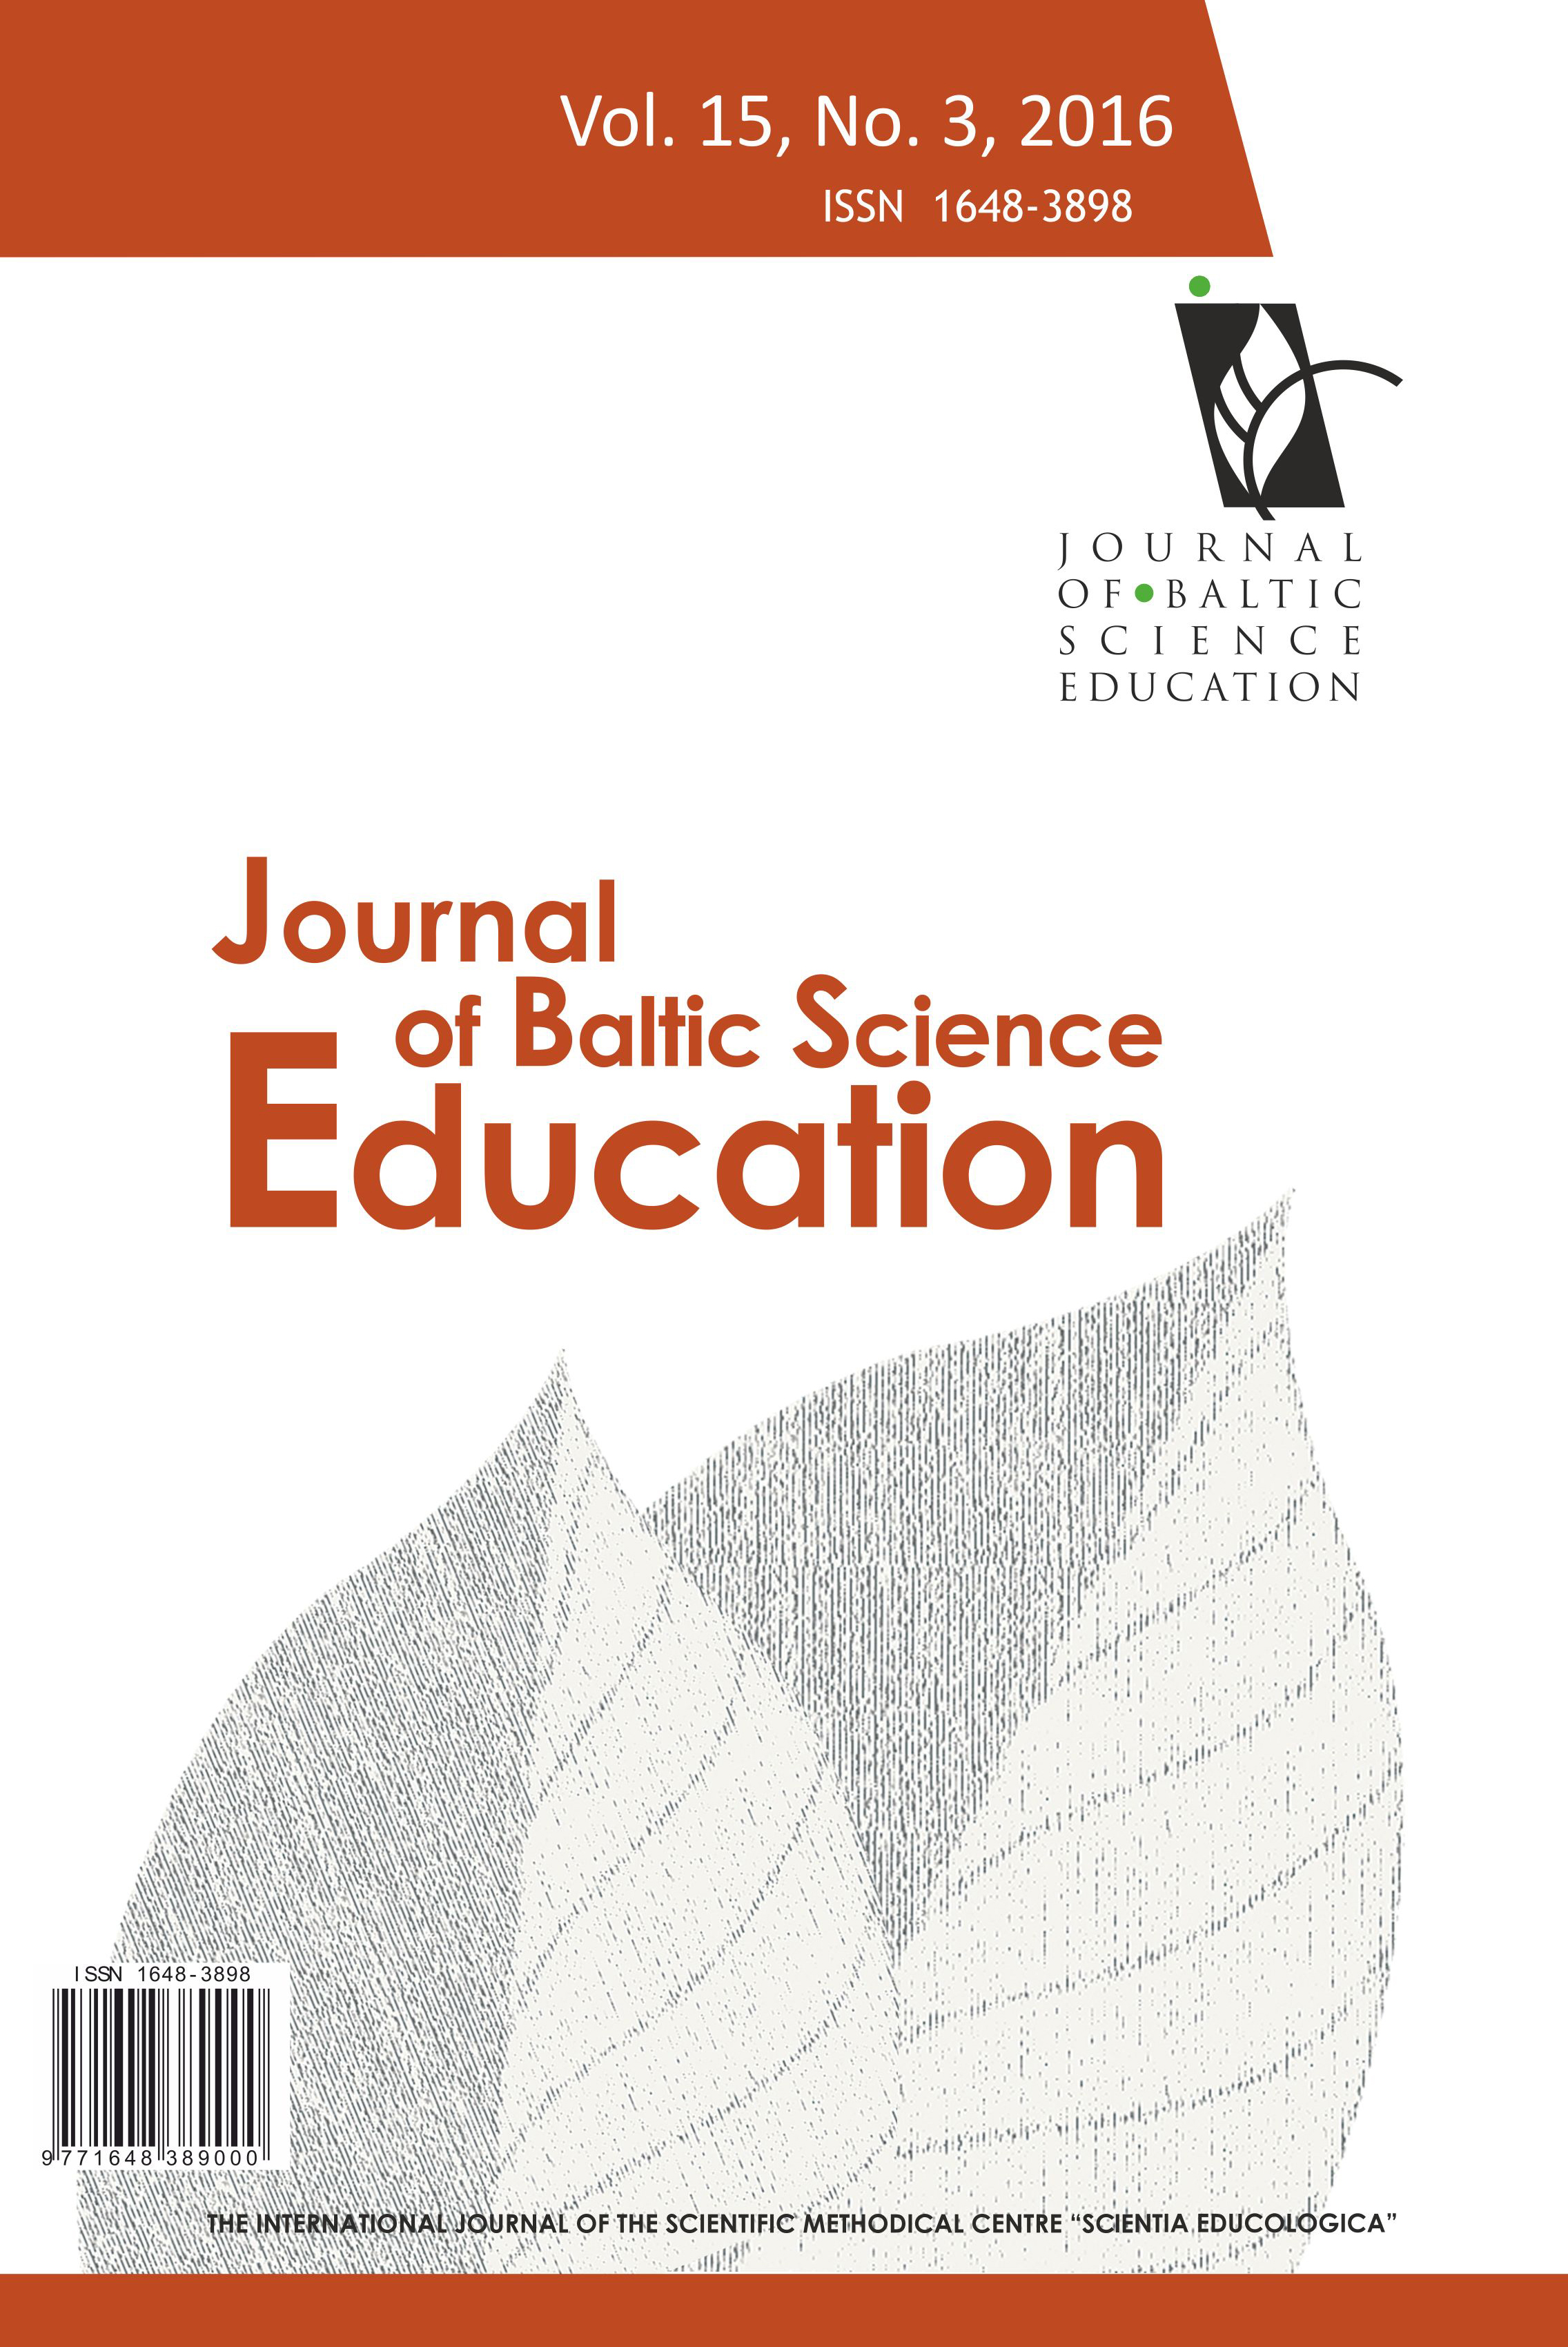 EXPLORING THE RELATIONSHIP BETWEEN METACOGNITION AND ATTITUDES TOWARDS SCIENCE OF SENIOR SECONDARY STUDENTS THROUGH A STRUCTURAL EQUATION MODELING ANALYSIS Cover Image